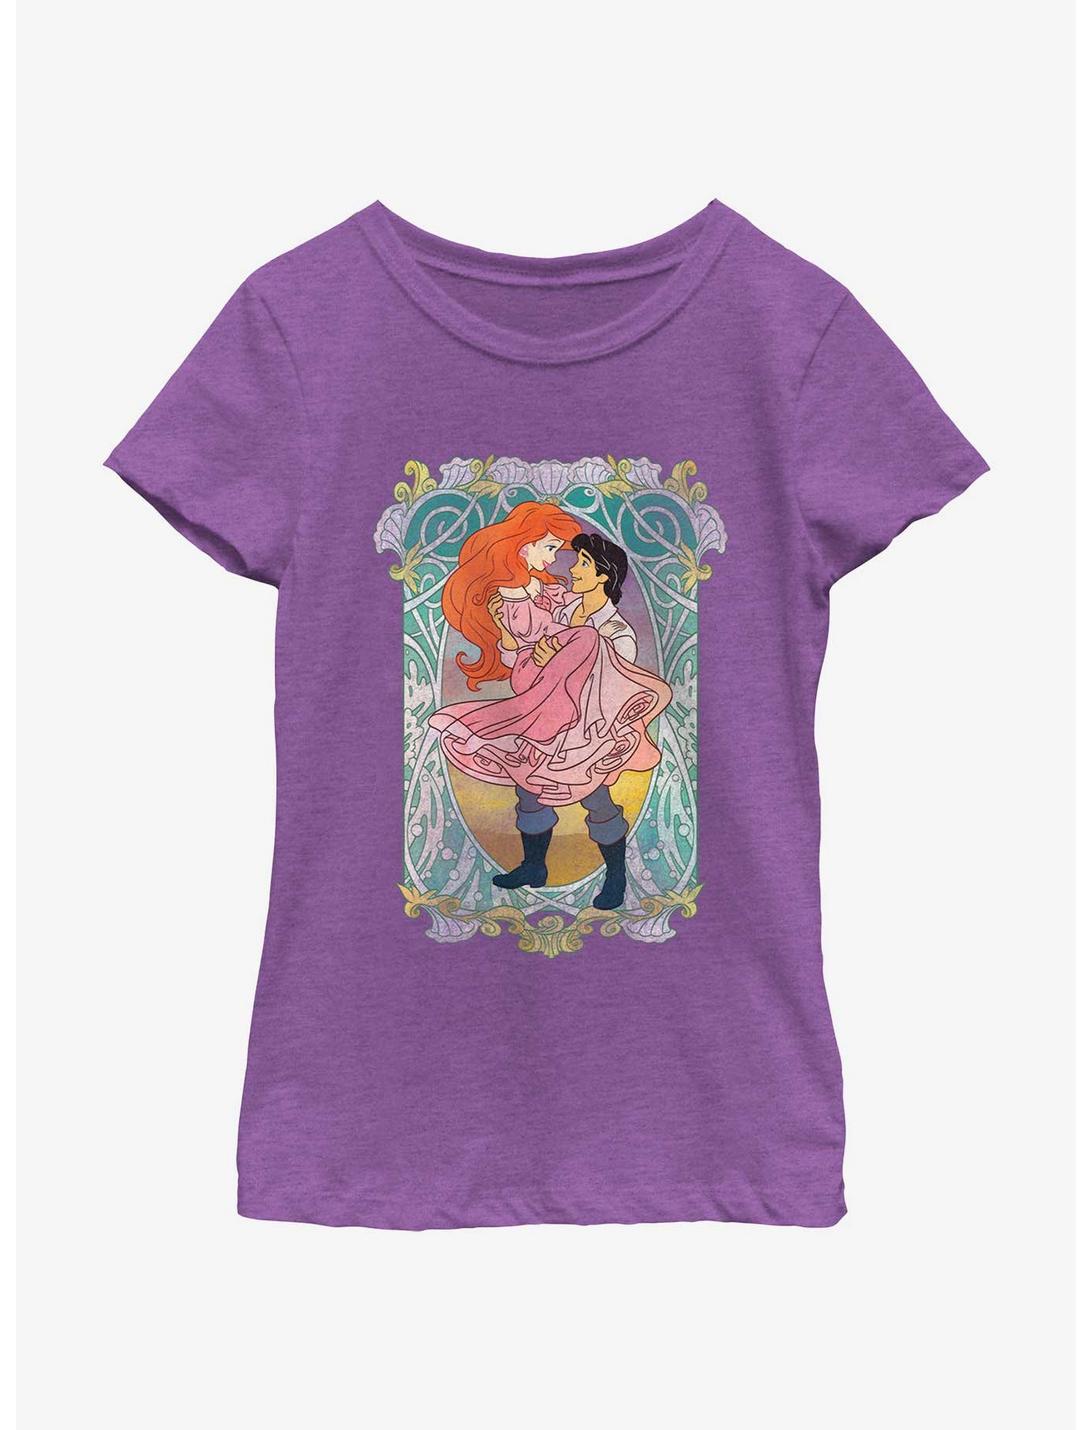 Disney The Little Mermaid Ariel and Eric Ever After Girls Youth T-Shirt, PURPLE BERRY, hi-res